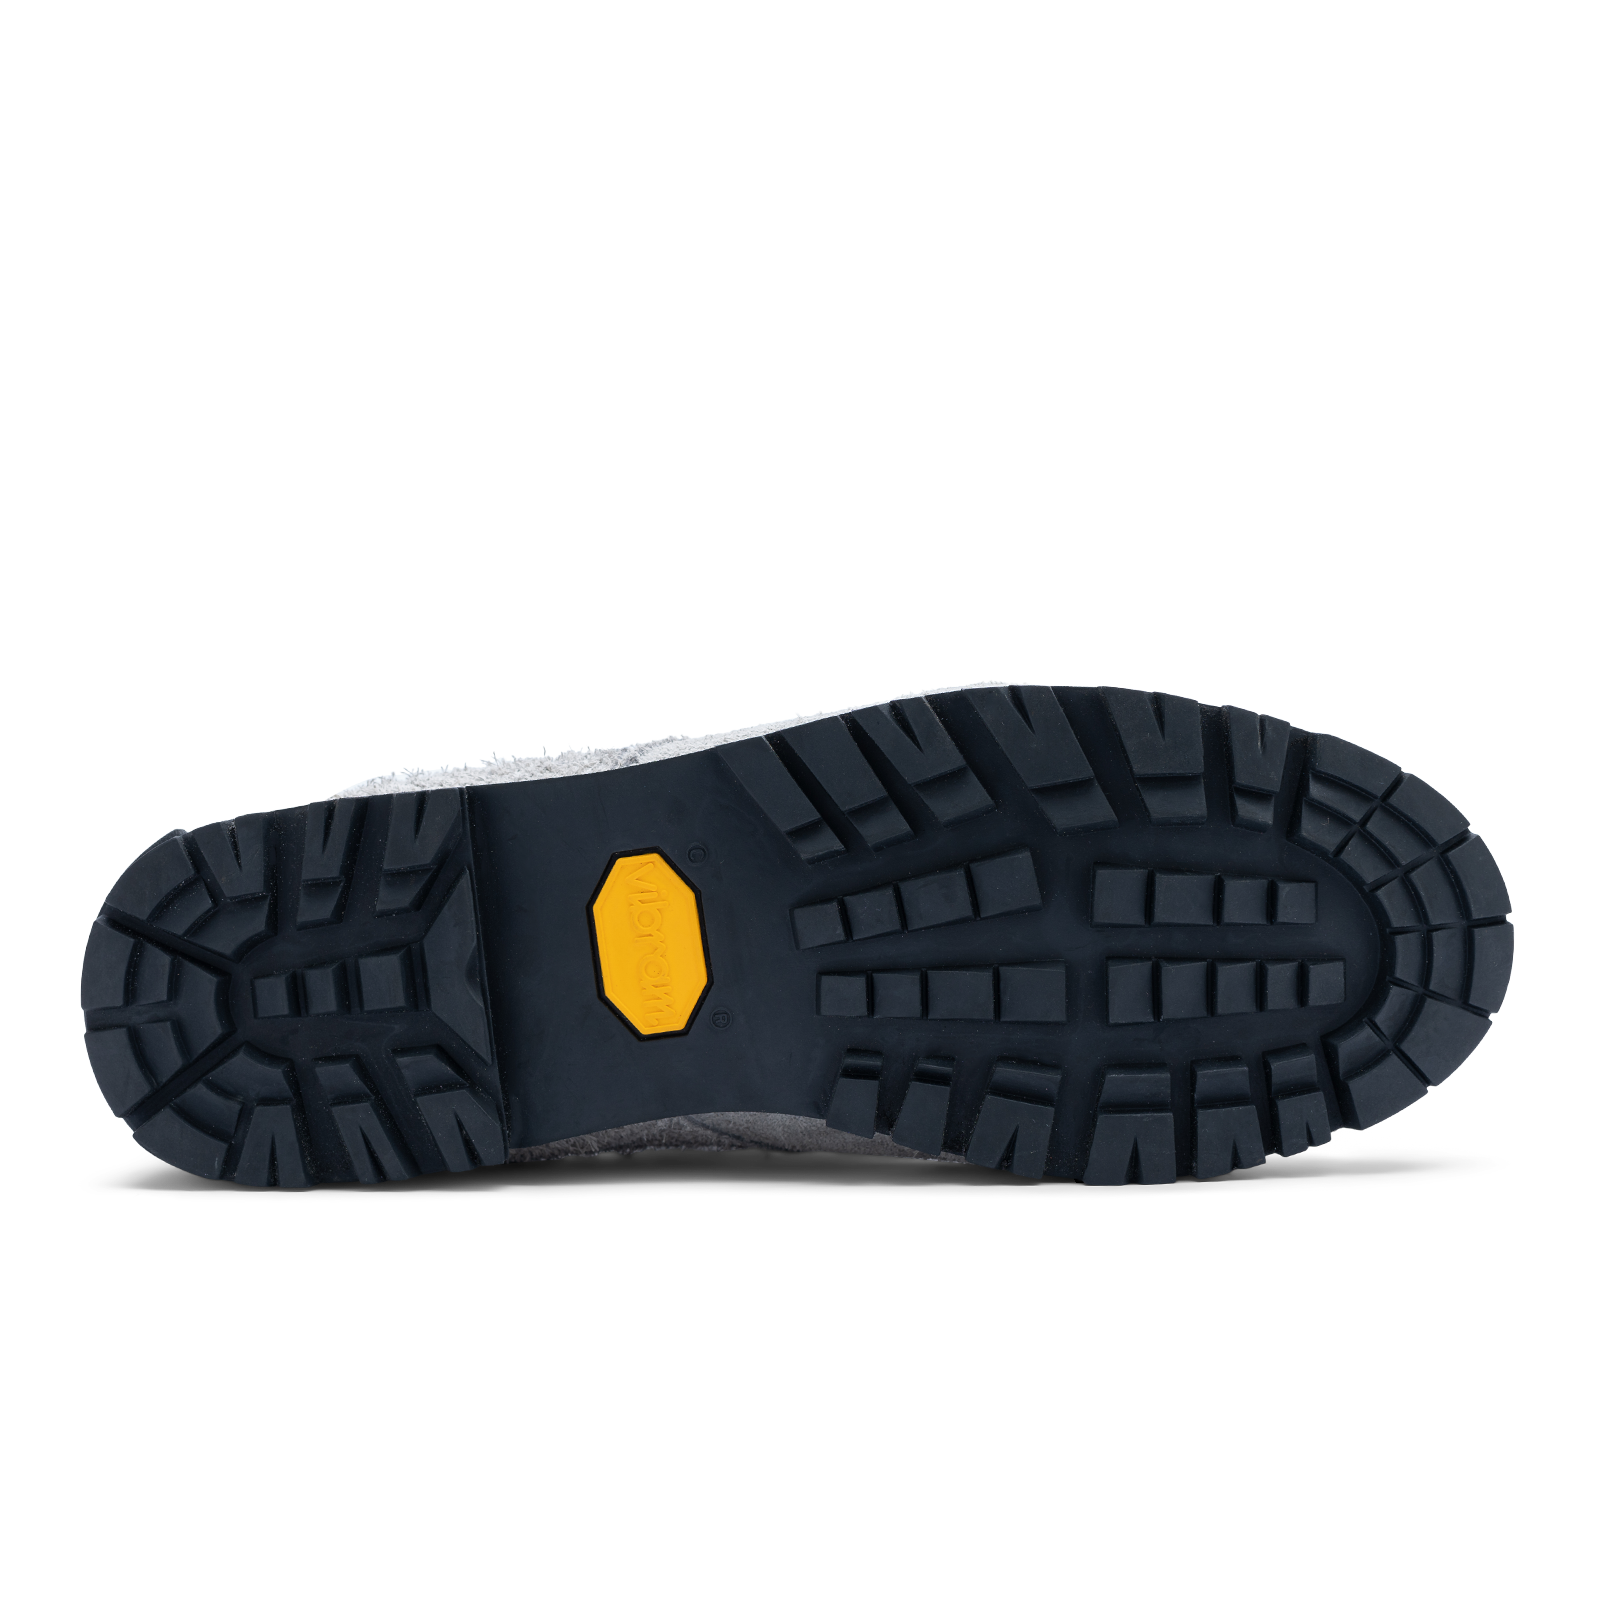 Vibram rubber sole / Approach / Lunar color features Light Grey colored hairy suede upper, gross grain webbing for laces. helastic heel detail, stretch mesh internal bootie, vintrage vibram hiking outsole and eva midsole.